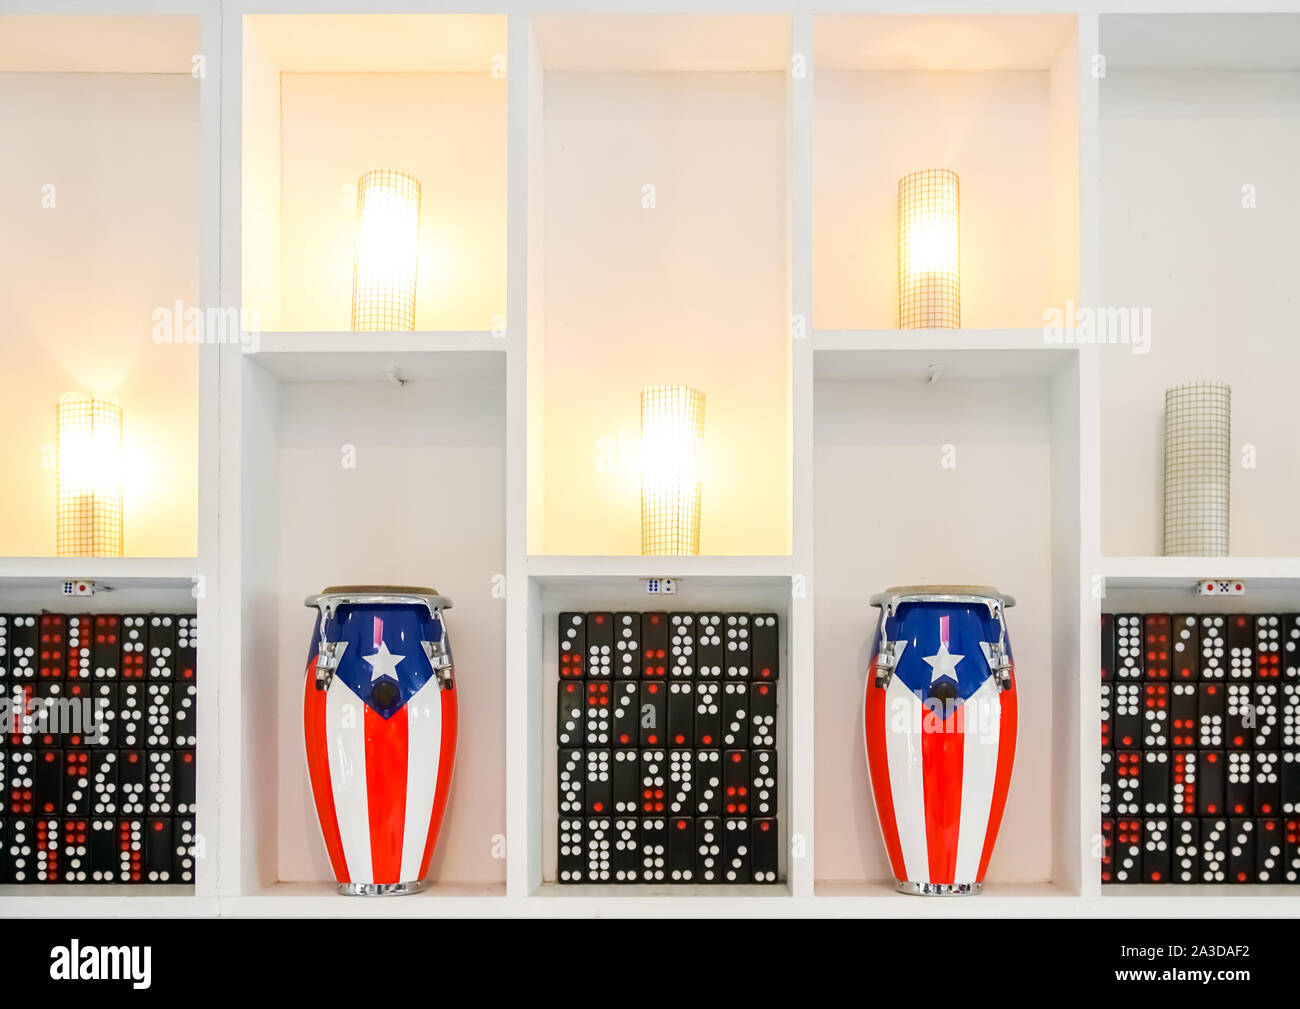 Display with Puerto Rican Flag Drums and Dominoes. Stock Photo